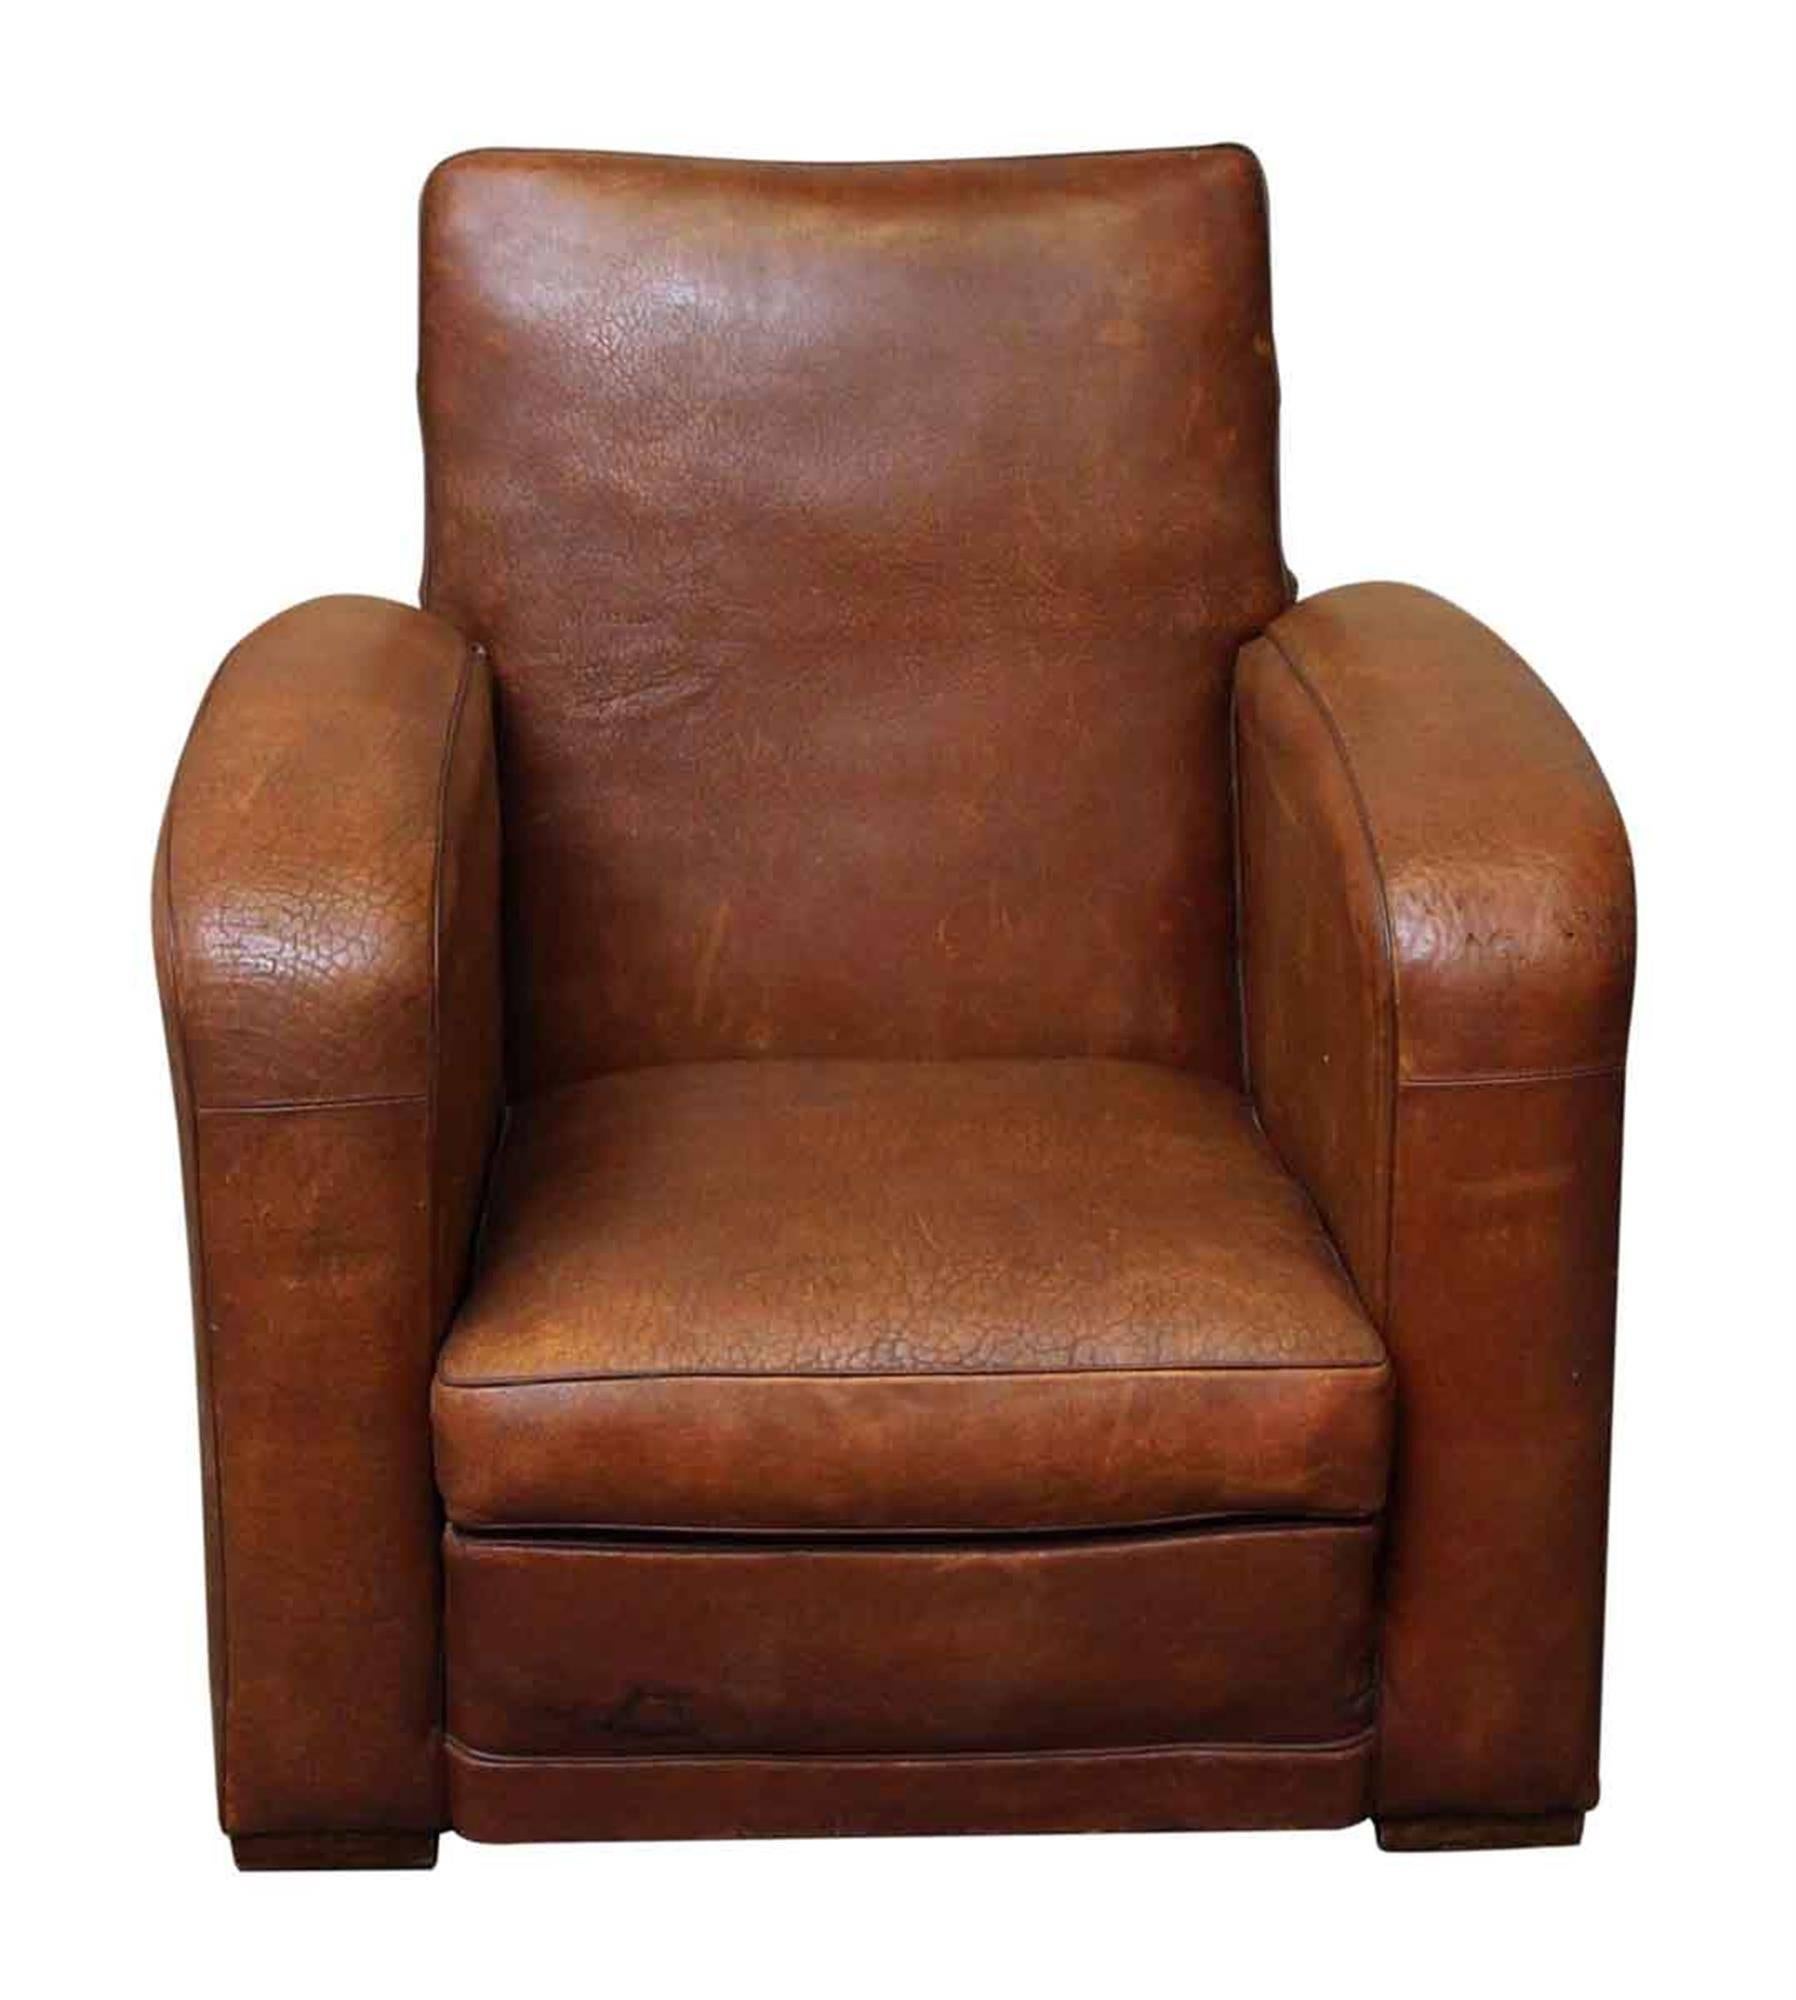 This single 1980s French Art Deco leather club chair is in excellent condition with a beautiful patina, studded back and square wooden feet. This chair is a nice size and very comfortable. Shows minor wear from age and use. This can be seen at our